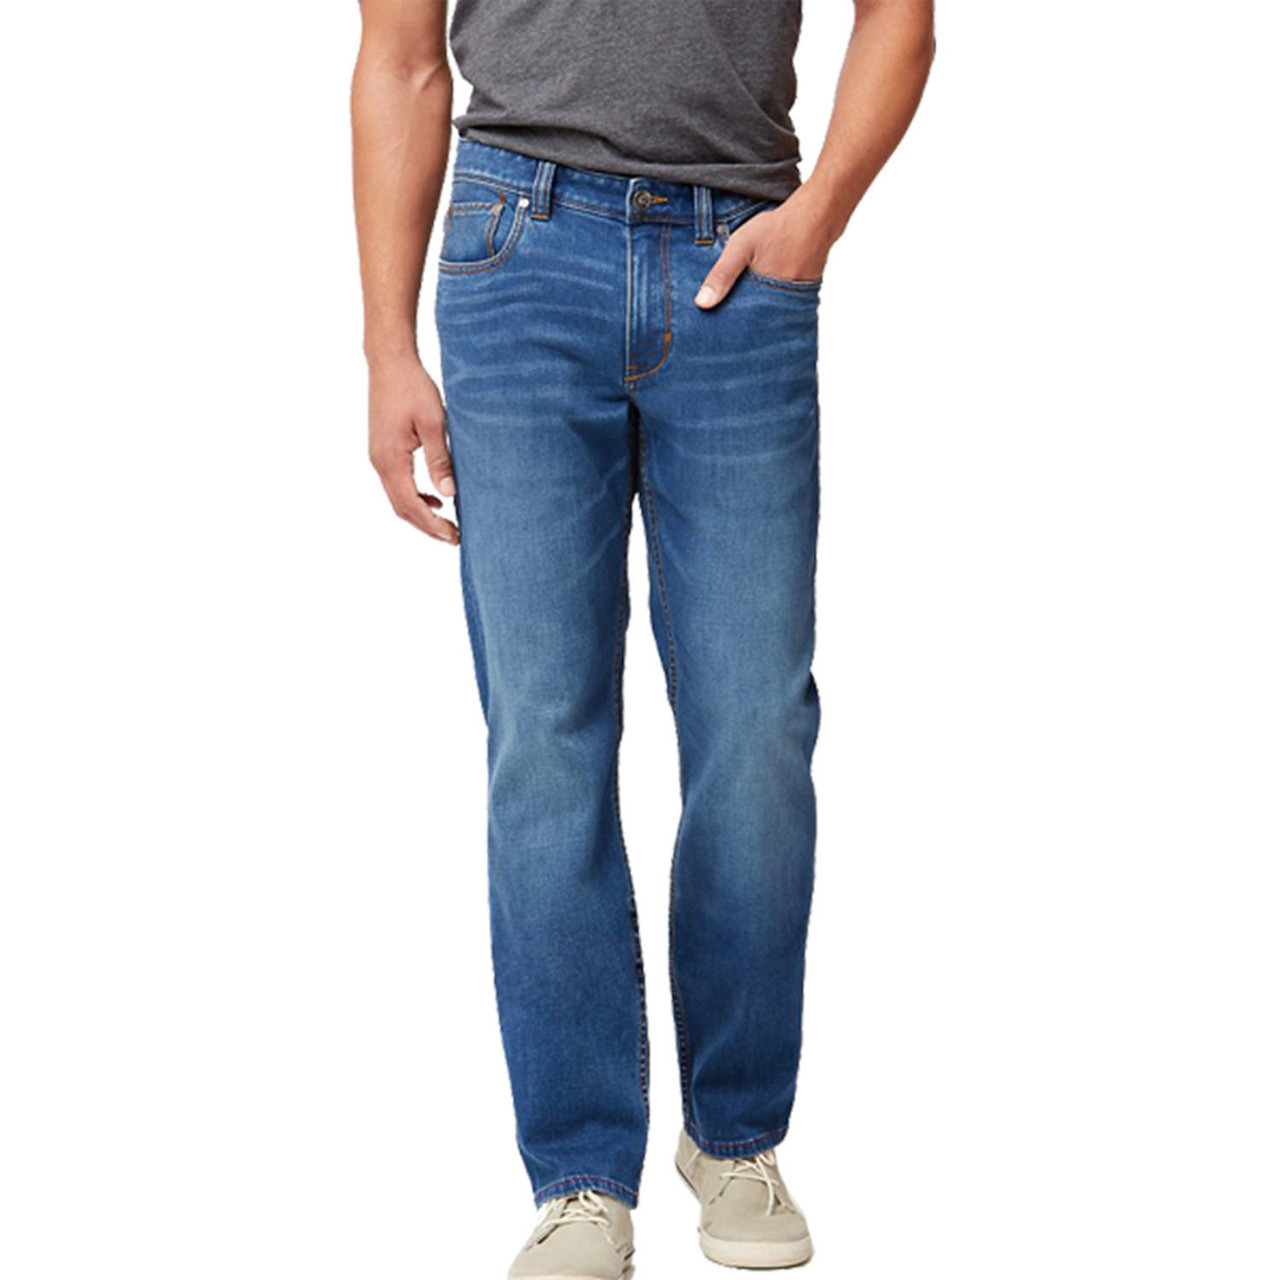 Tommy Bahama 'Antigua Cove' Authentic Fit Jeans - Dick Anthony Ltd.